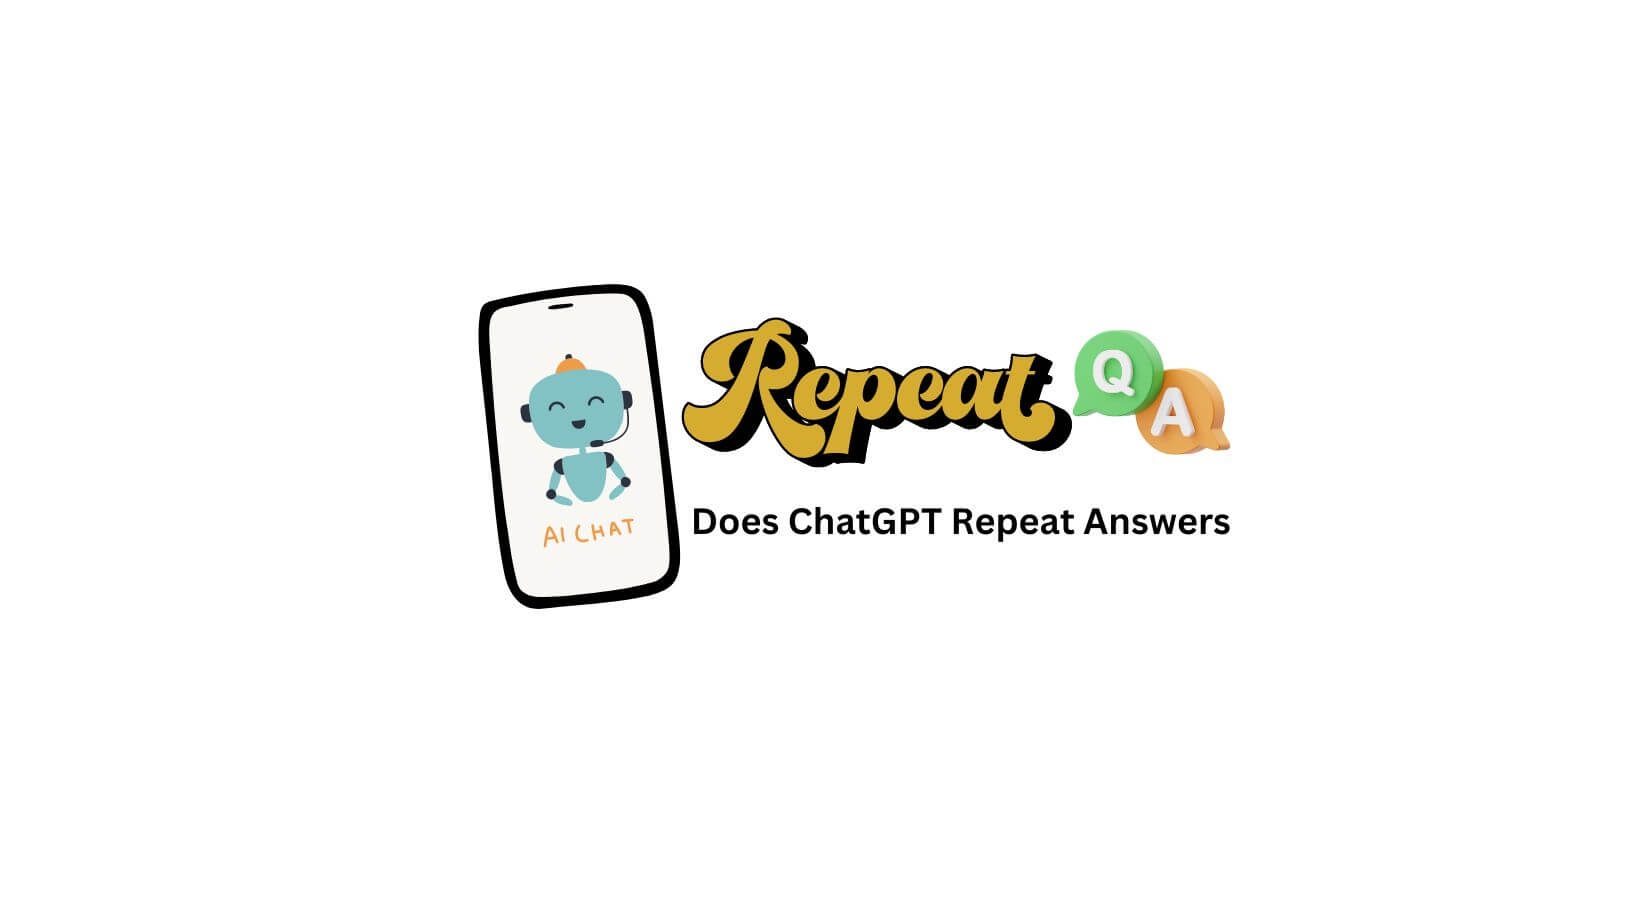 Does ChatGPT Repeat Answers